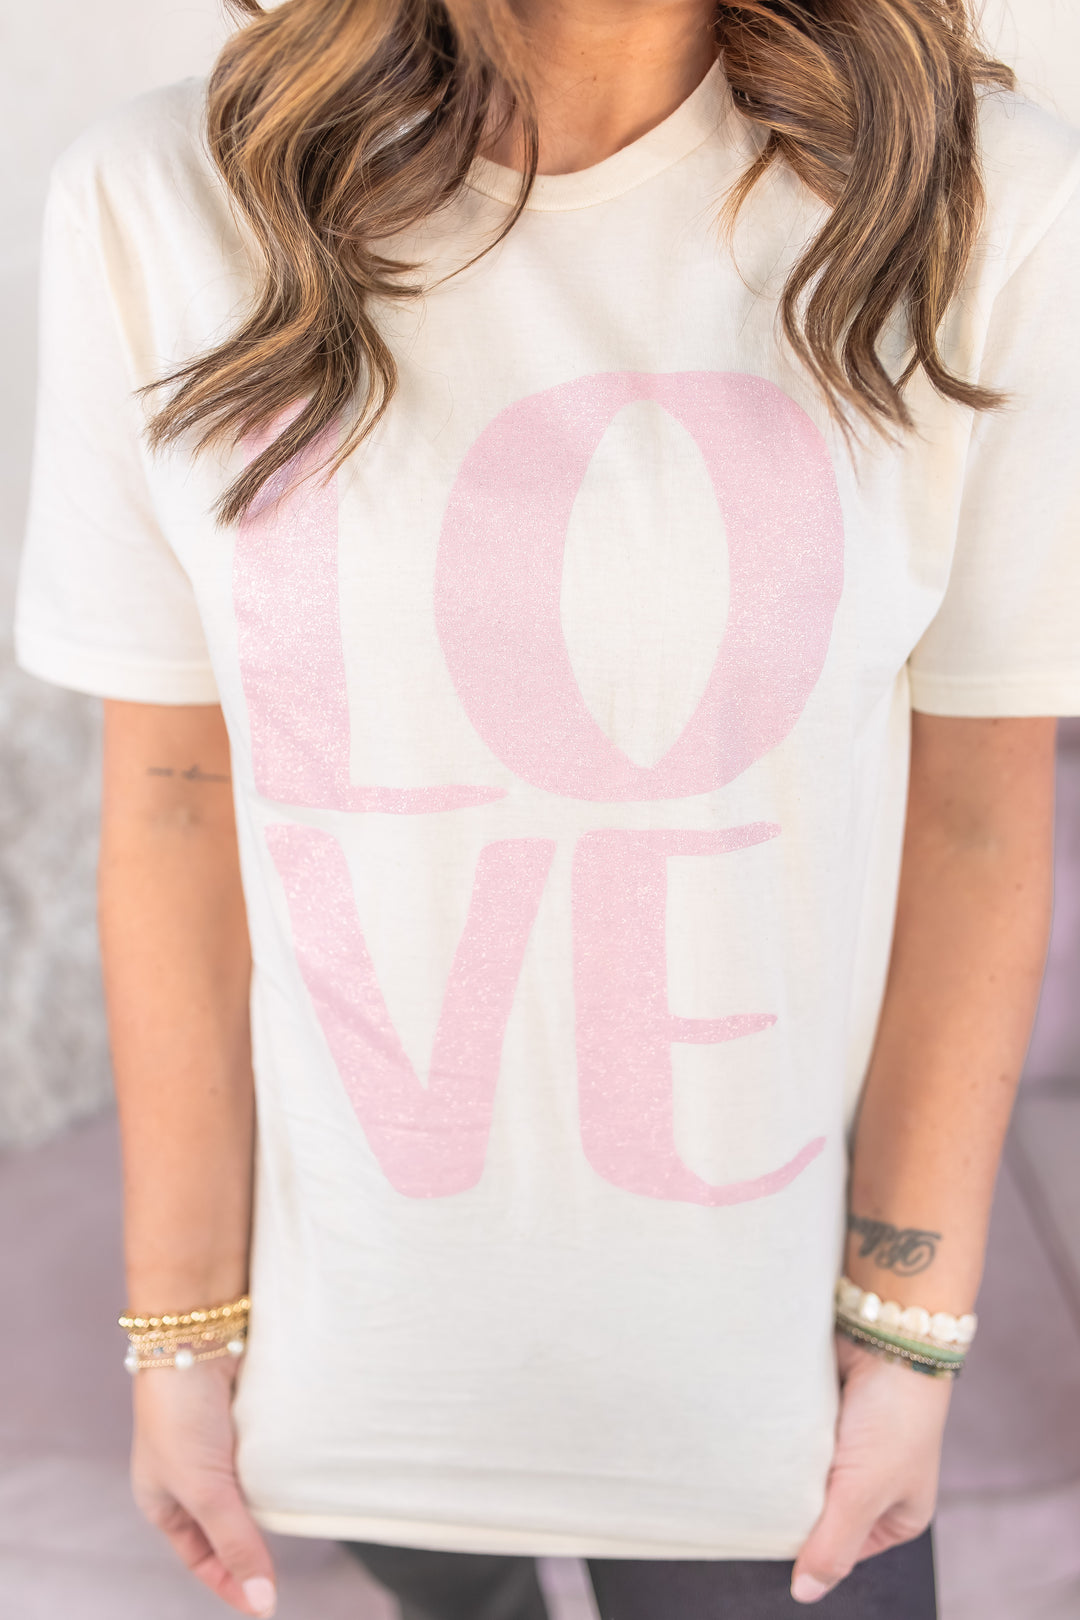 The LOVE Graphic Tee